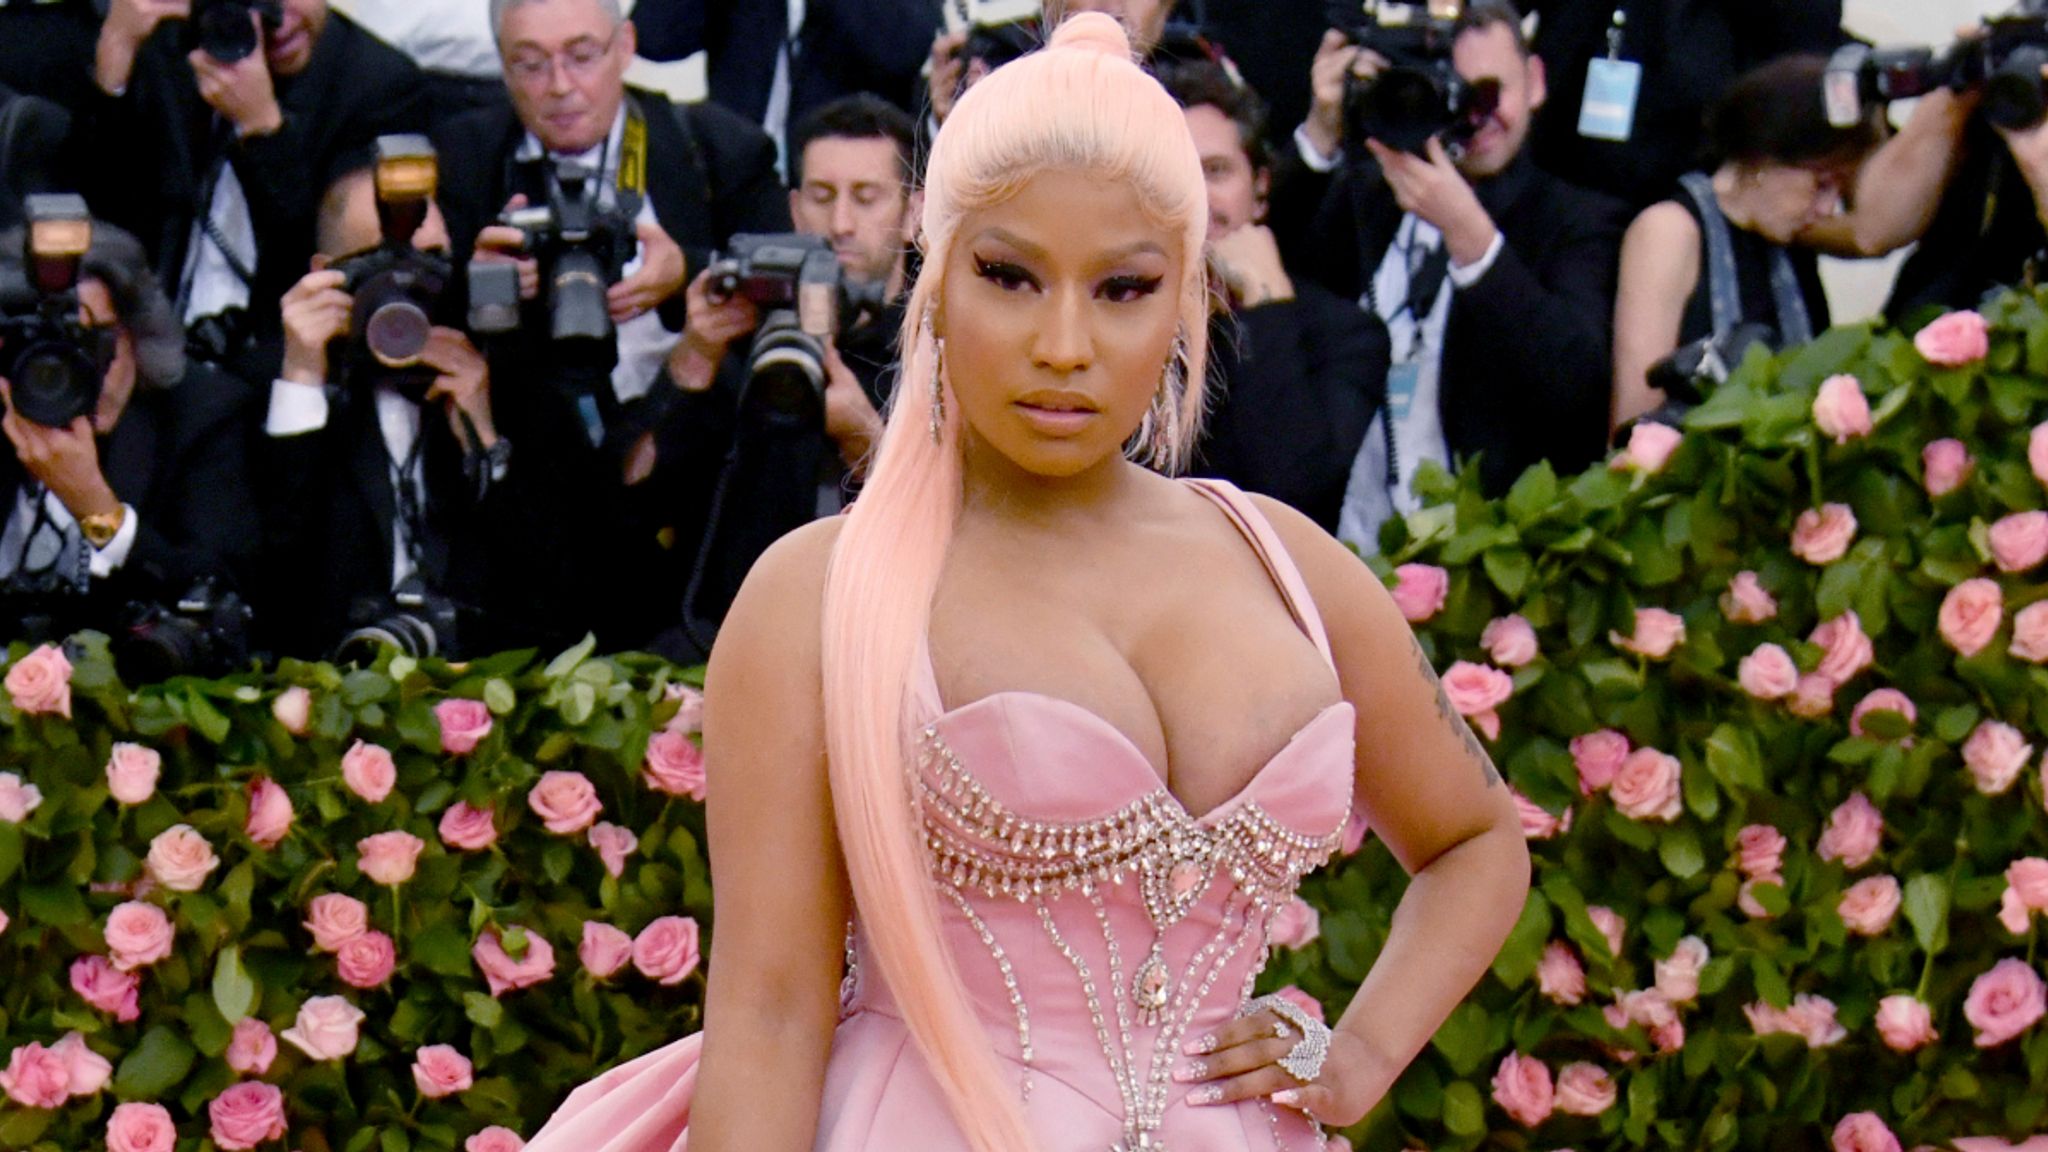 White House offers Nicki Minaj call with doctor to answer vaccine questions